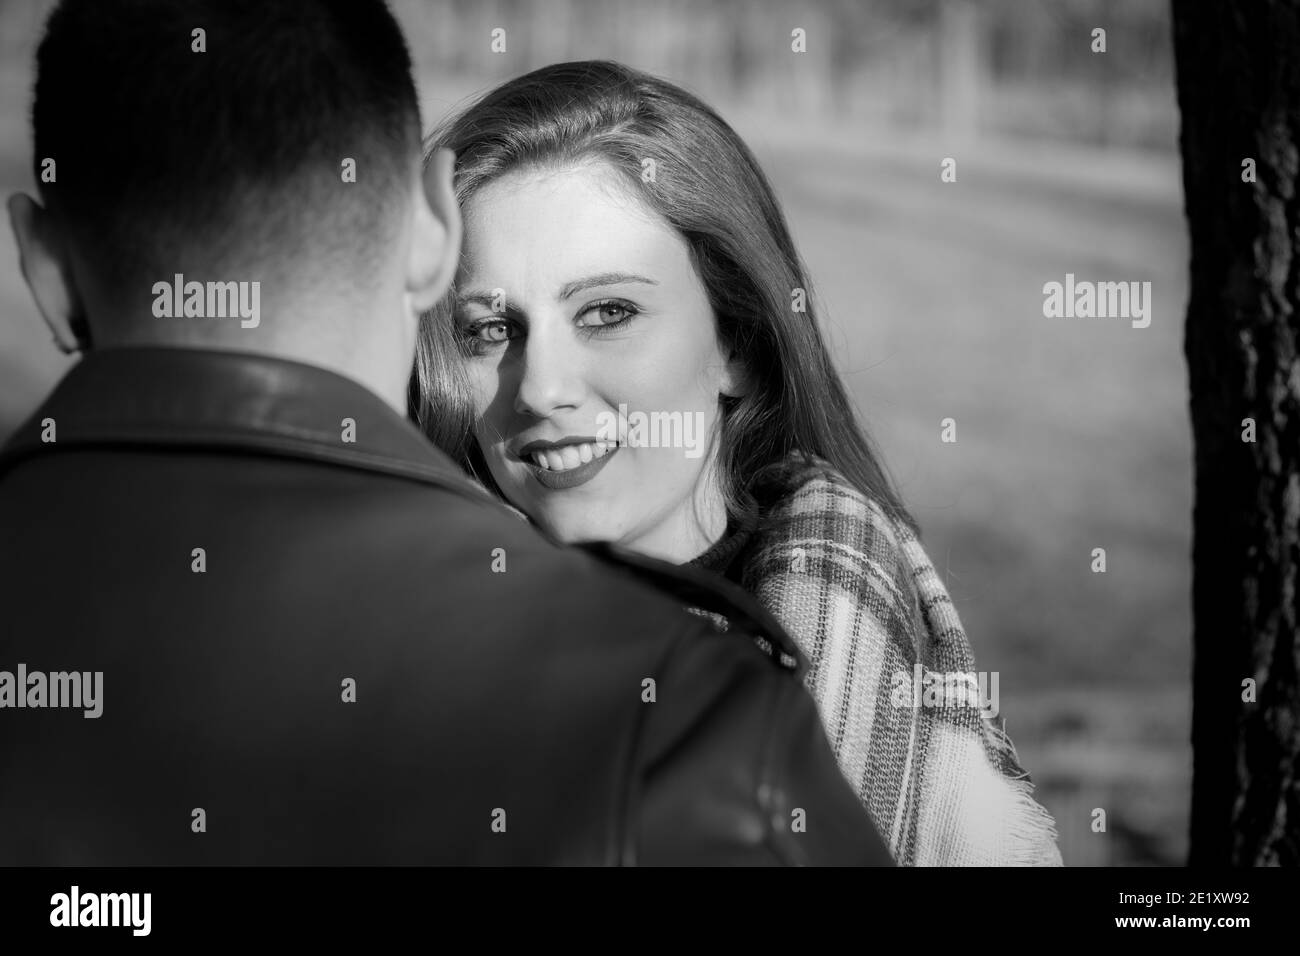 Young woman stands next to boyfriend with smile while looking to the side. Black and white photography. Valentine Day, dating concepts Stock Photo